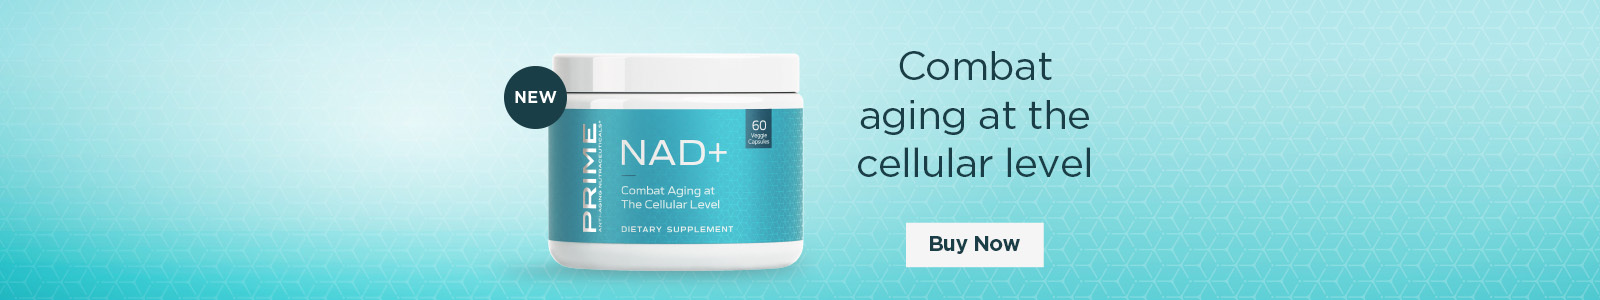 Prime Anti-aging Nutraceuticals NAD+ Combat aging at the cellular level Buy Now